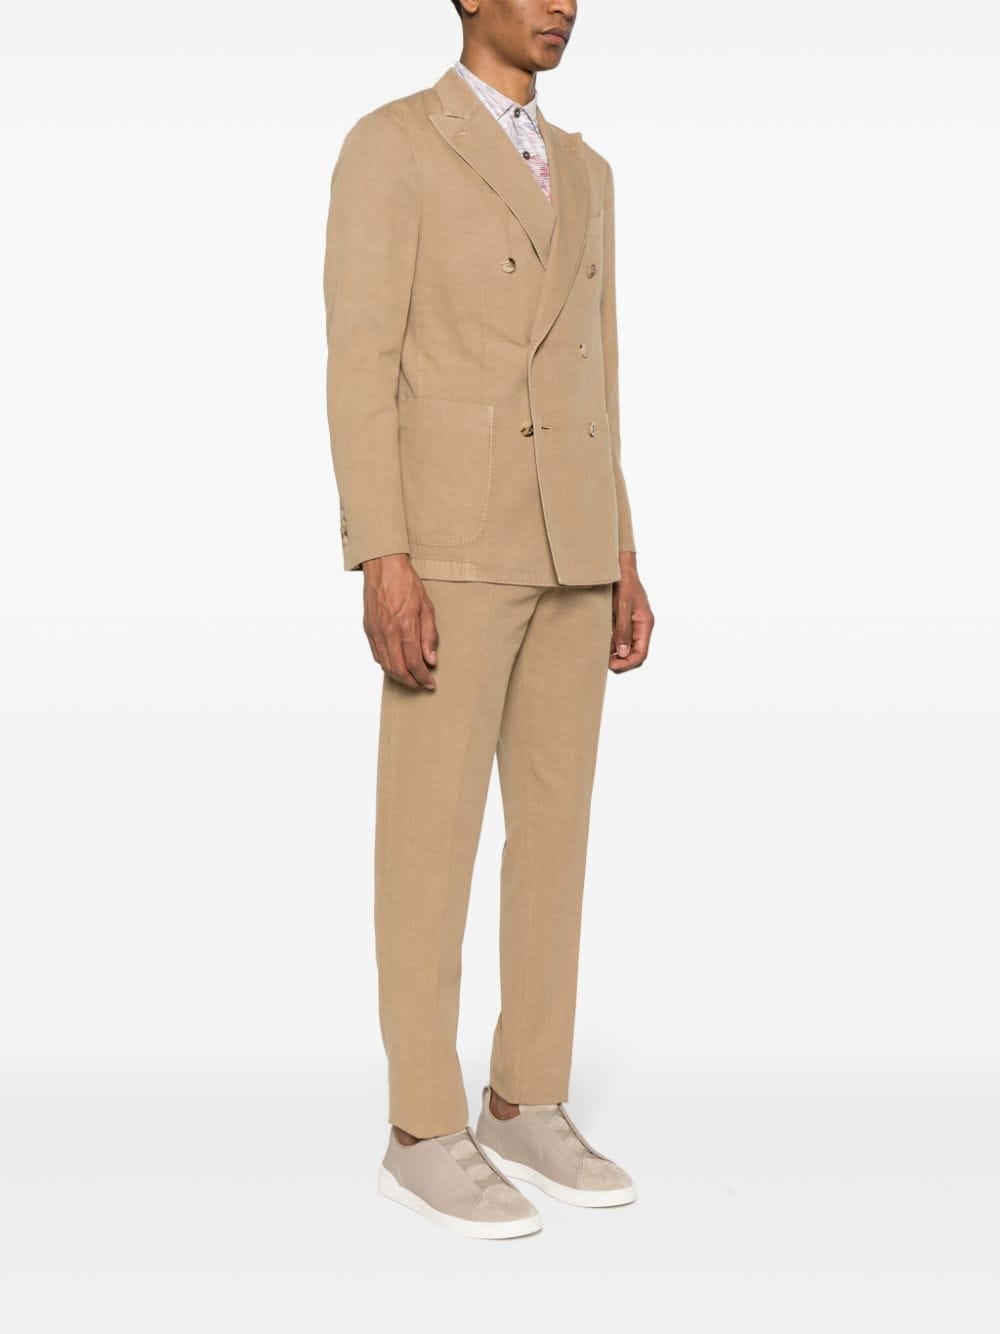 BOGLIOLI Men's Double-Breasted Suit in Camel Brown Cotton-Linen Blend for SS24